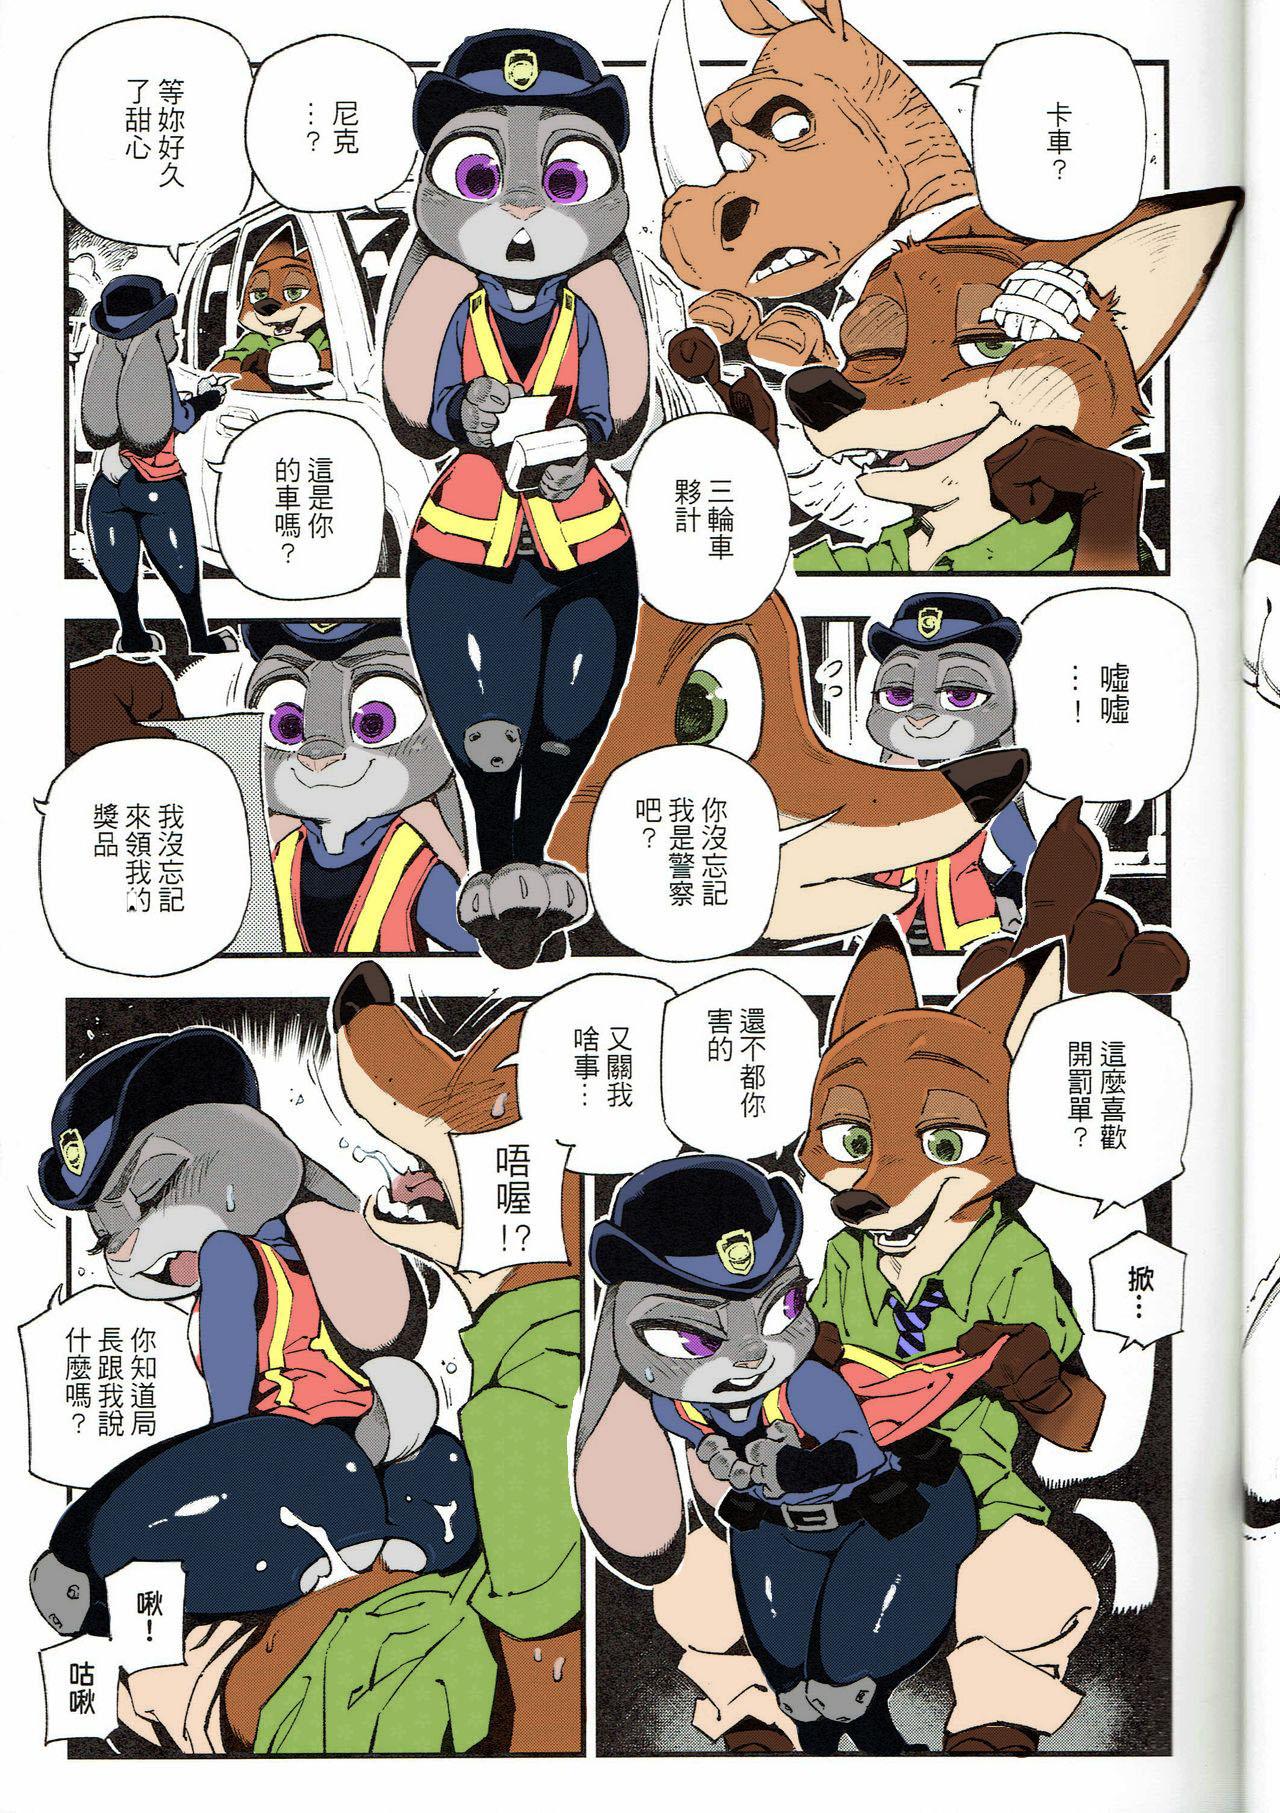 Webcam What Does The Fox Say? - Zootopia Hooker - Page 11